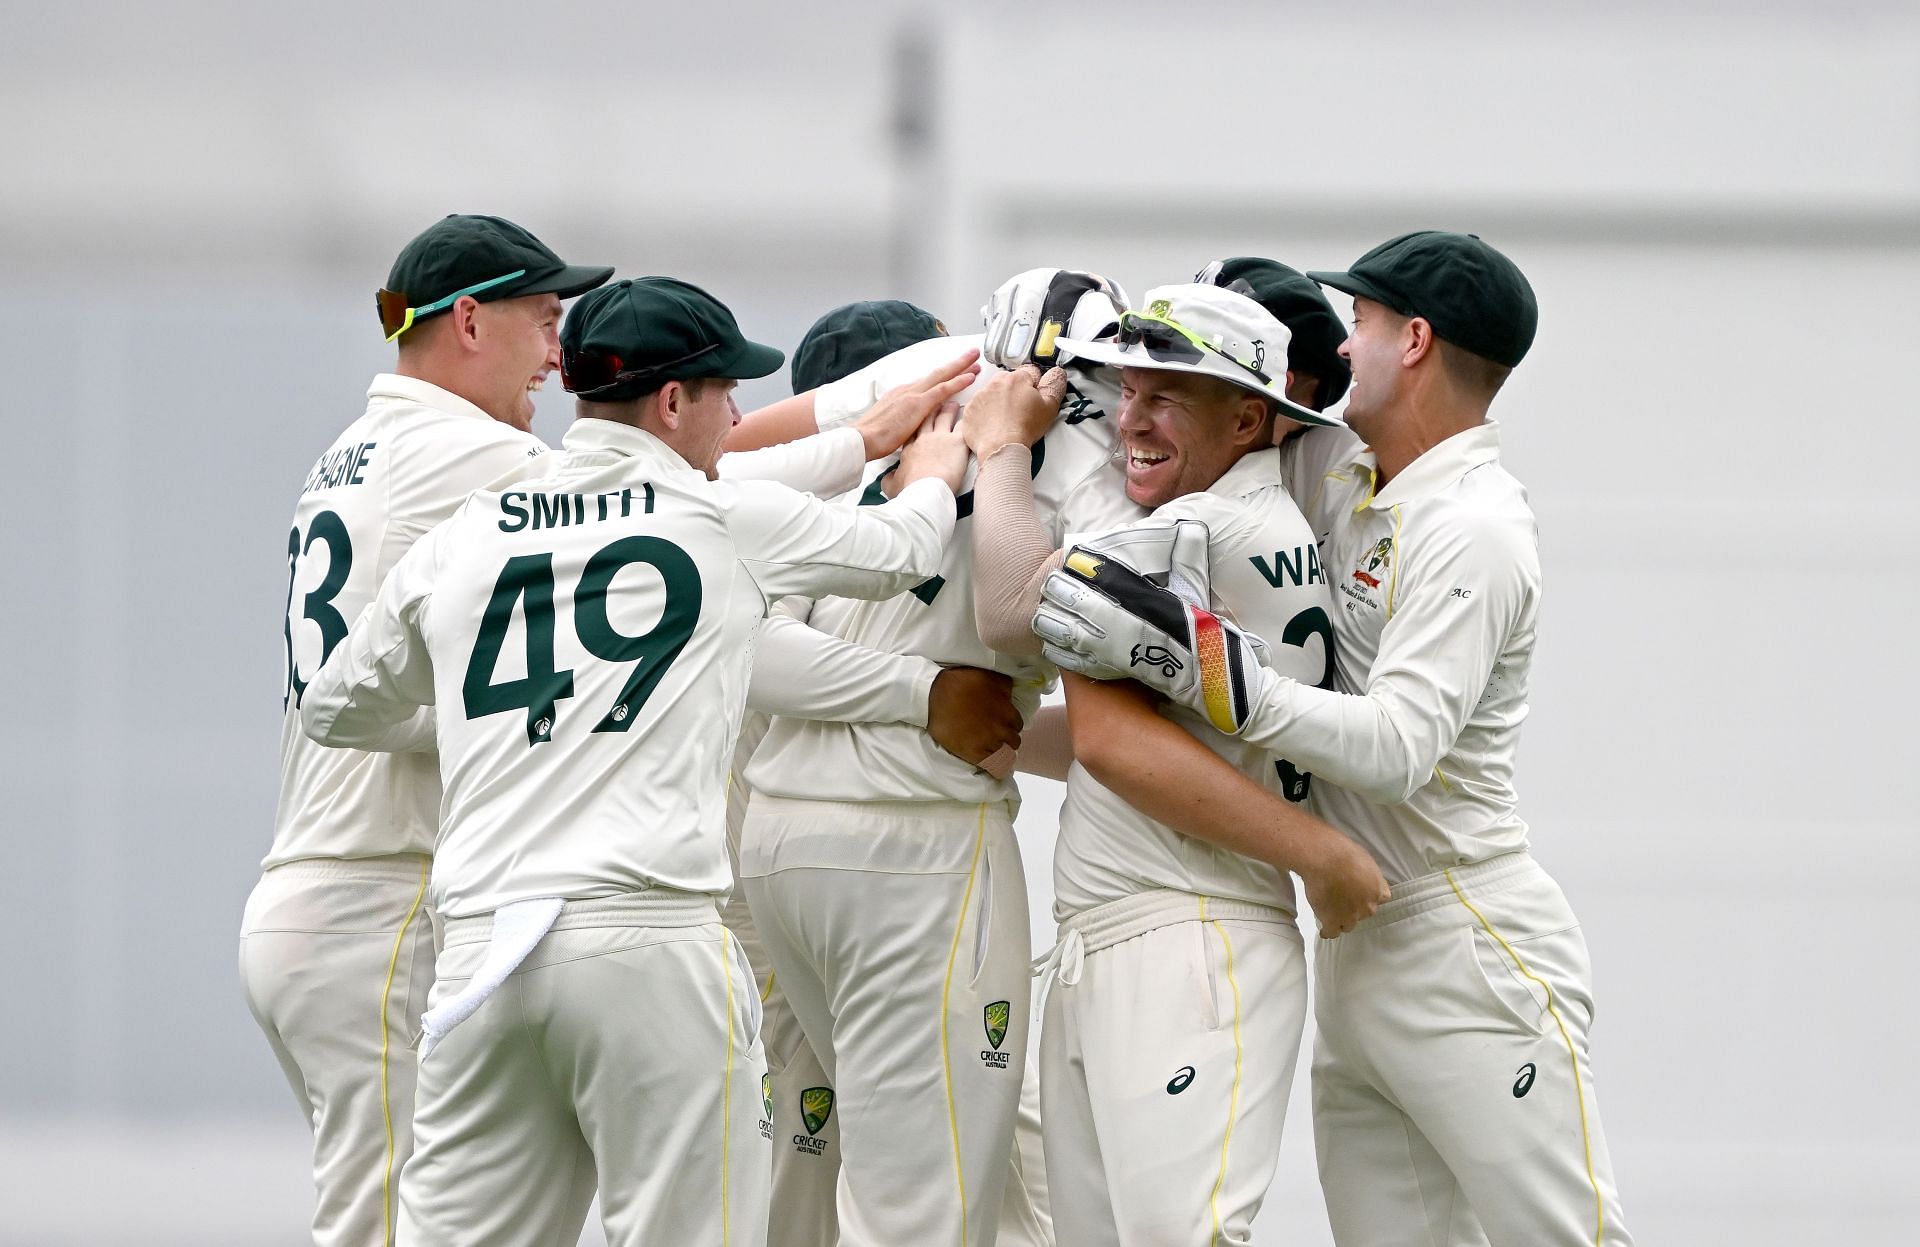 Australia v South Africa - First Test: Day 2